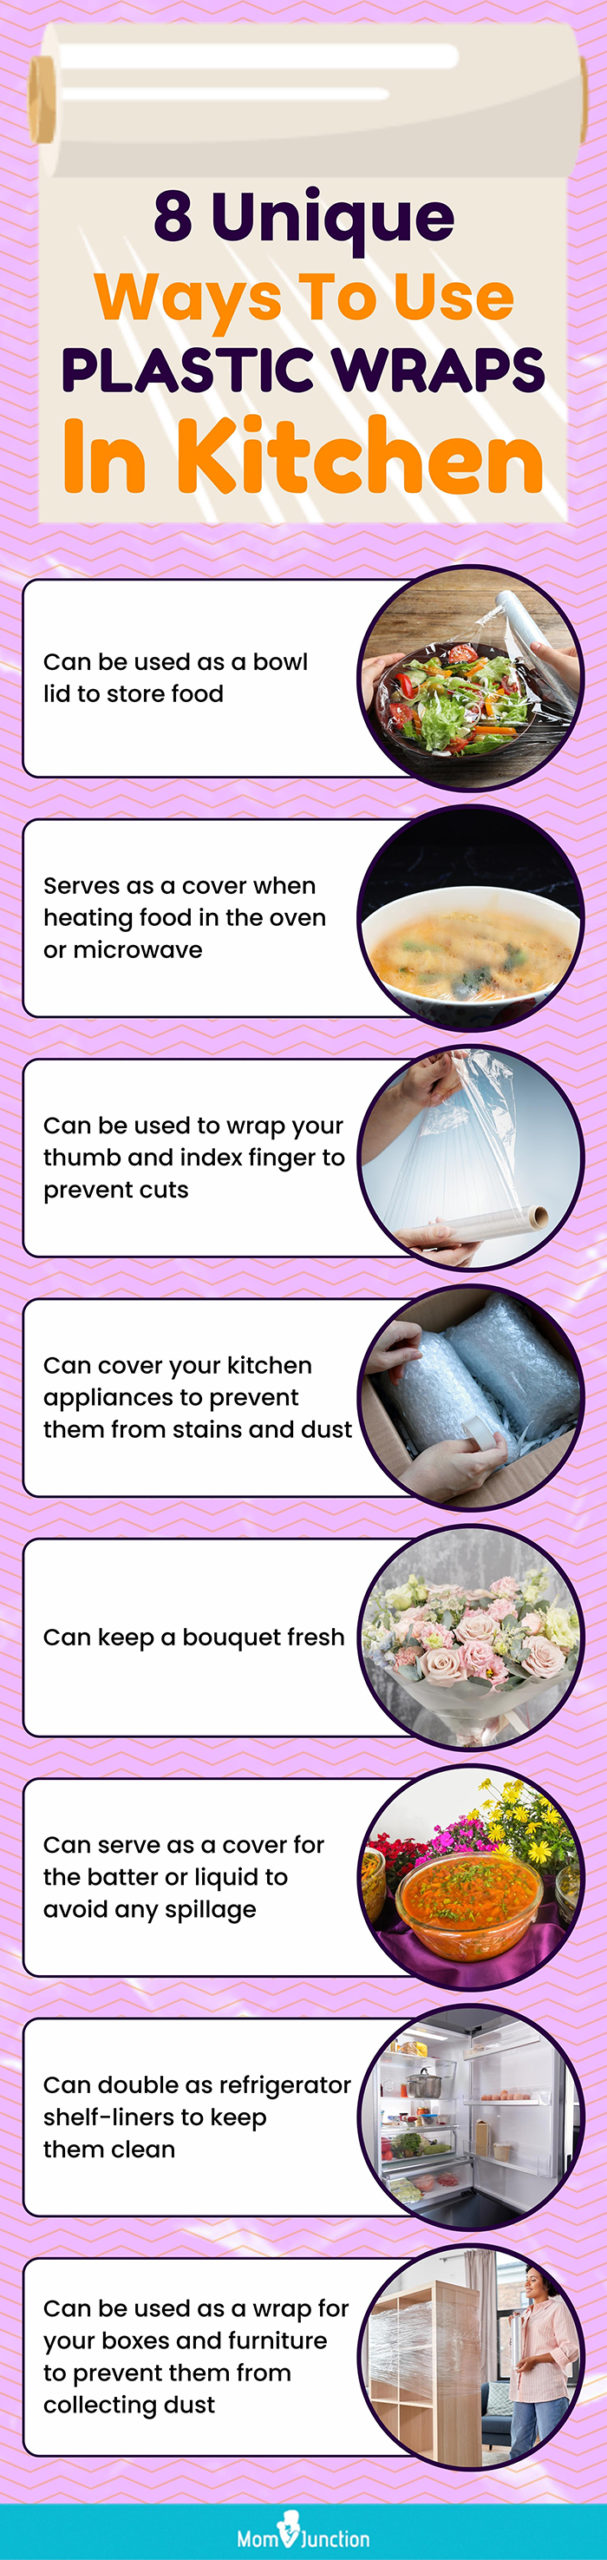 https://cdn2.momjunction.com/wp-content/uploads/2020/09/Infographic-Creative-Uses-Of-Plastic-Wraps-In-Kitchen-scaled.jpg